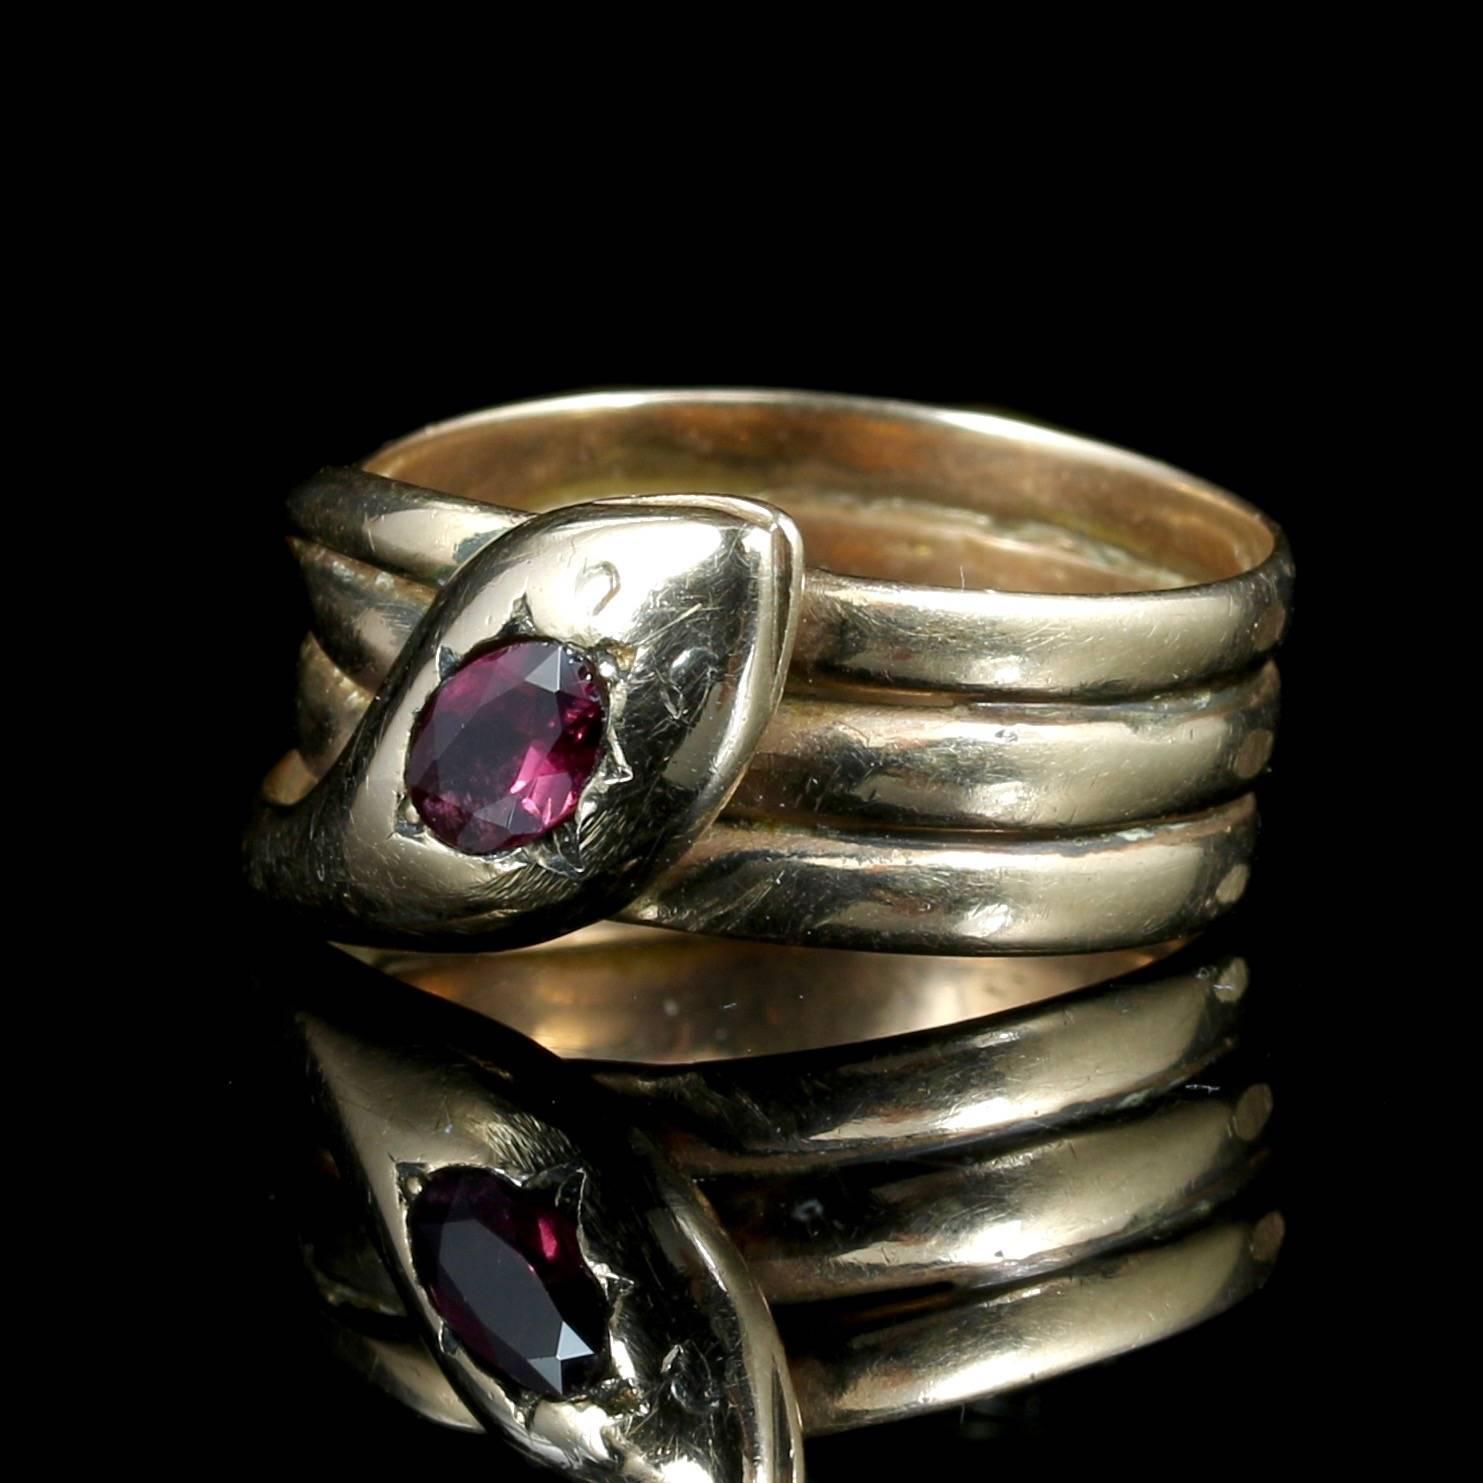 This genuine Victorian serpent ring is Chester hallmarked 

Circa 1900

Set with a deep red Almandine Garnet in his head 0.65ct 
 
The Garnet is a stone of purity and truth as well as a symbol of love and compassion. 

Set in 9ct gold.

The Garnet